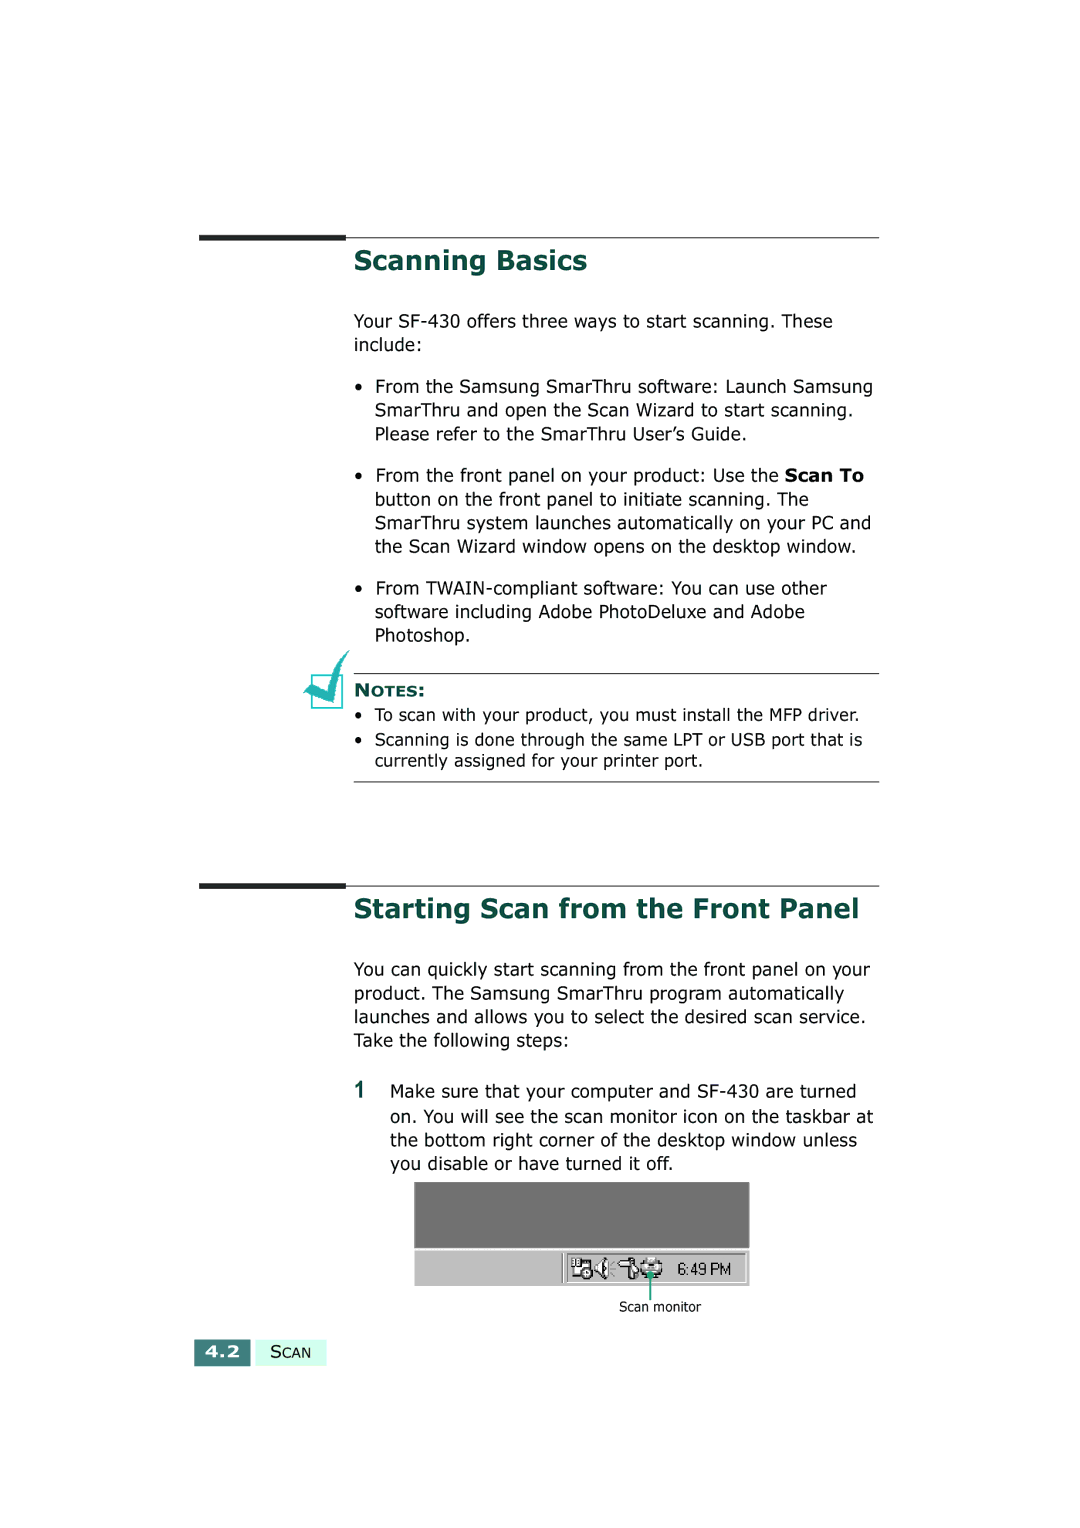 Samsung SF-430 manual Scanning Basics, Starting Scan from the Front Panel 